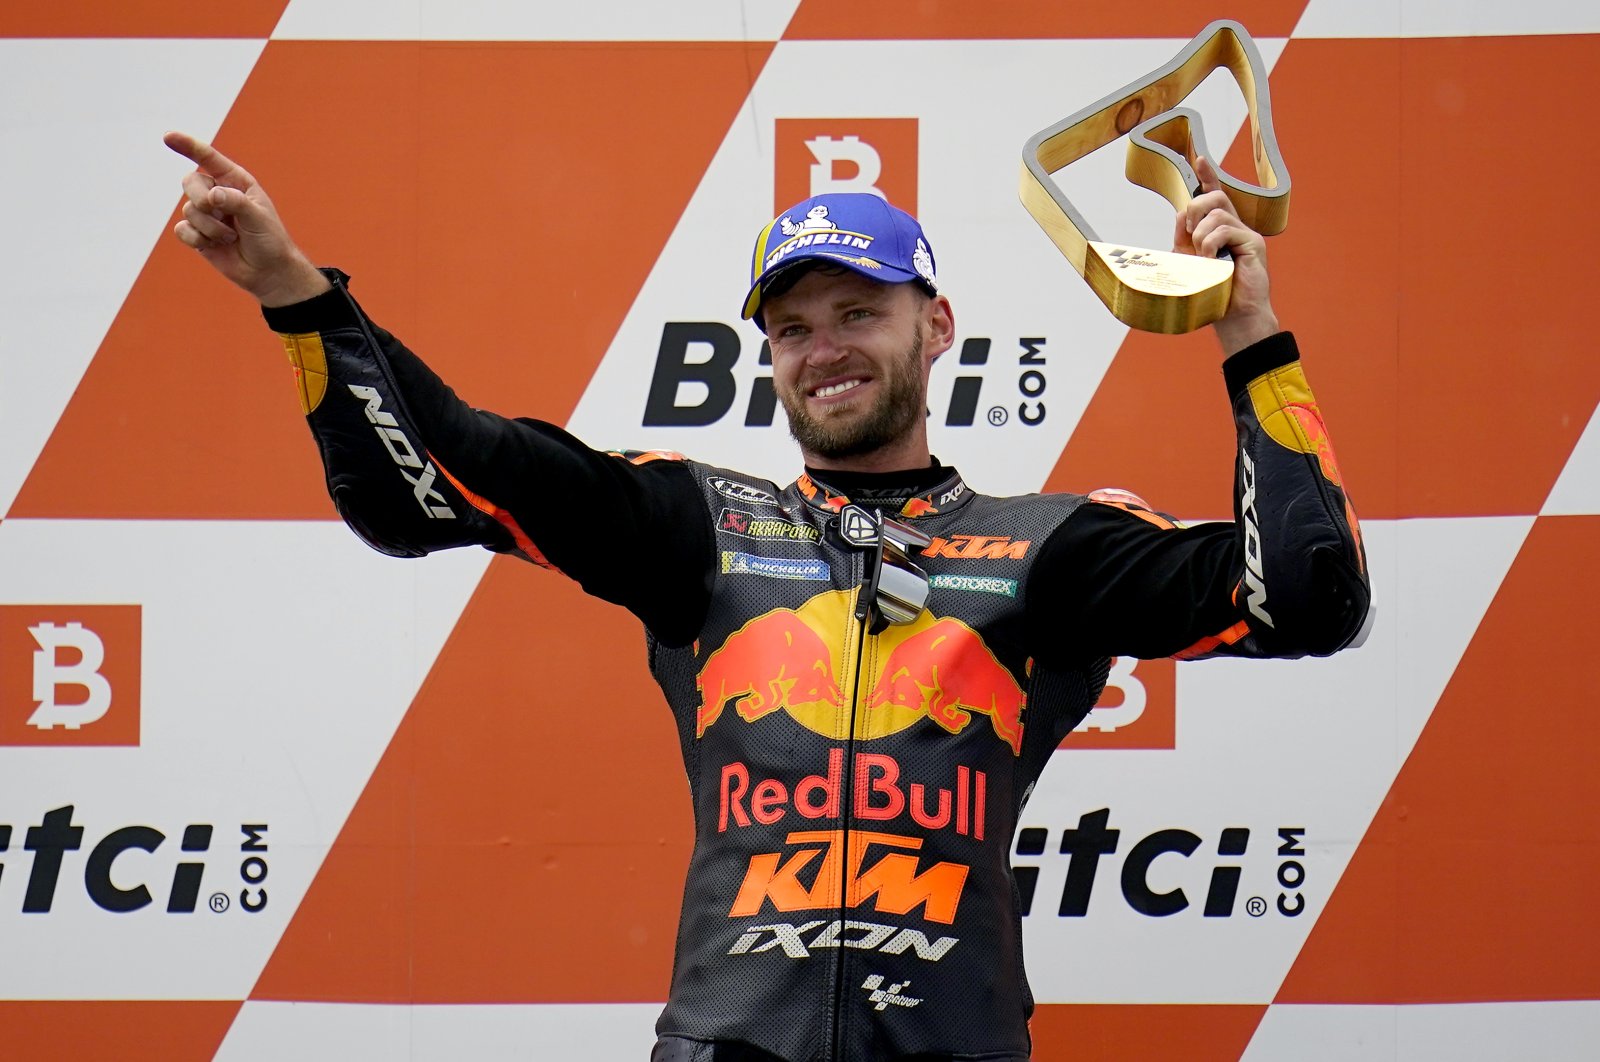 South Africa's Brad Binder celebrates winning the Austrian motorcycle Grand Prix at the Red Bull Ring in Spielberg, Austria, Aug. 15, 2021. (AP Photo)